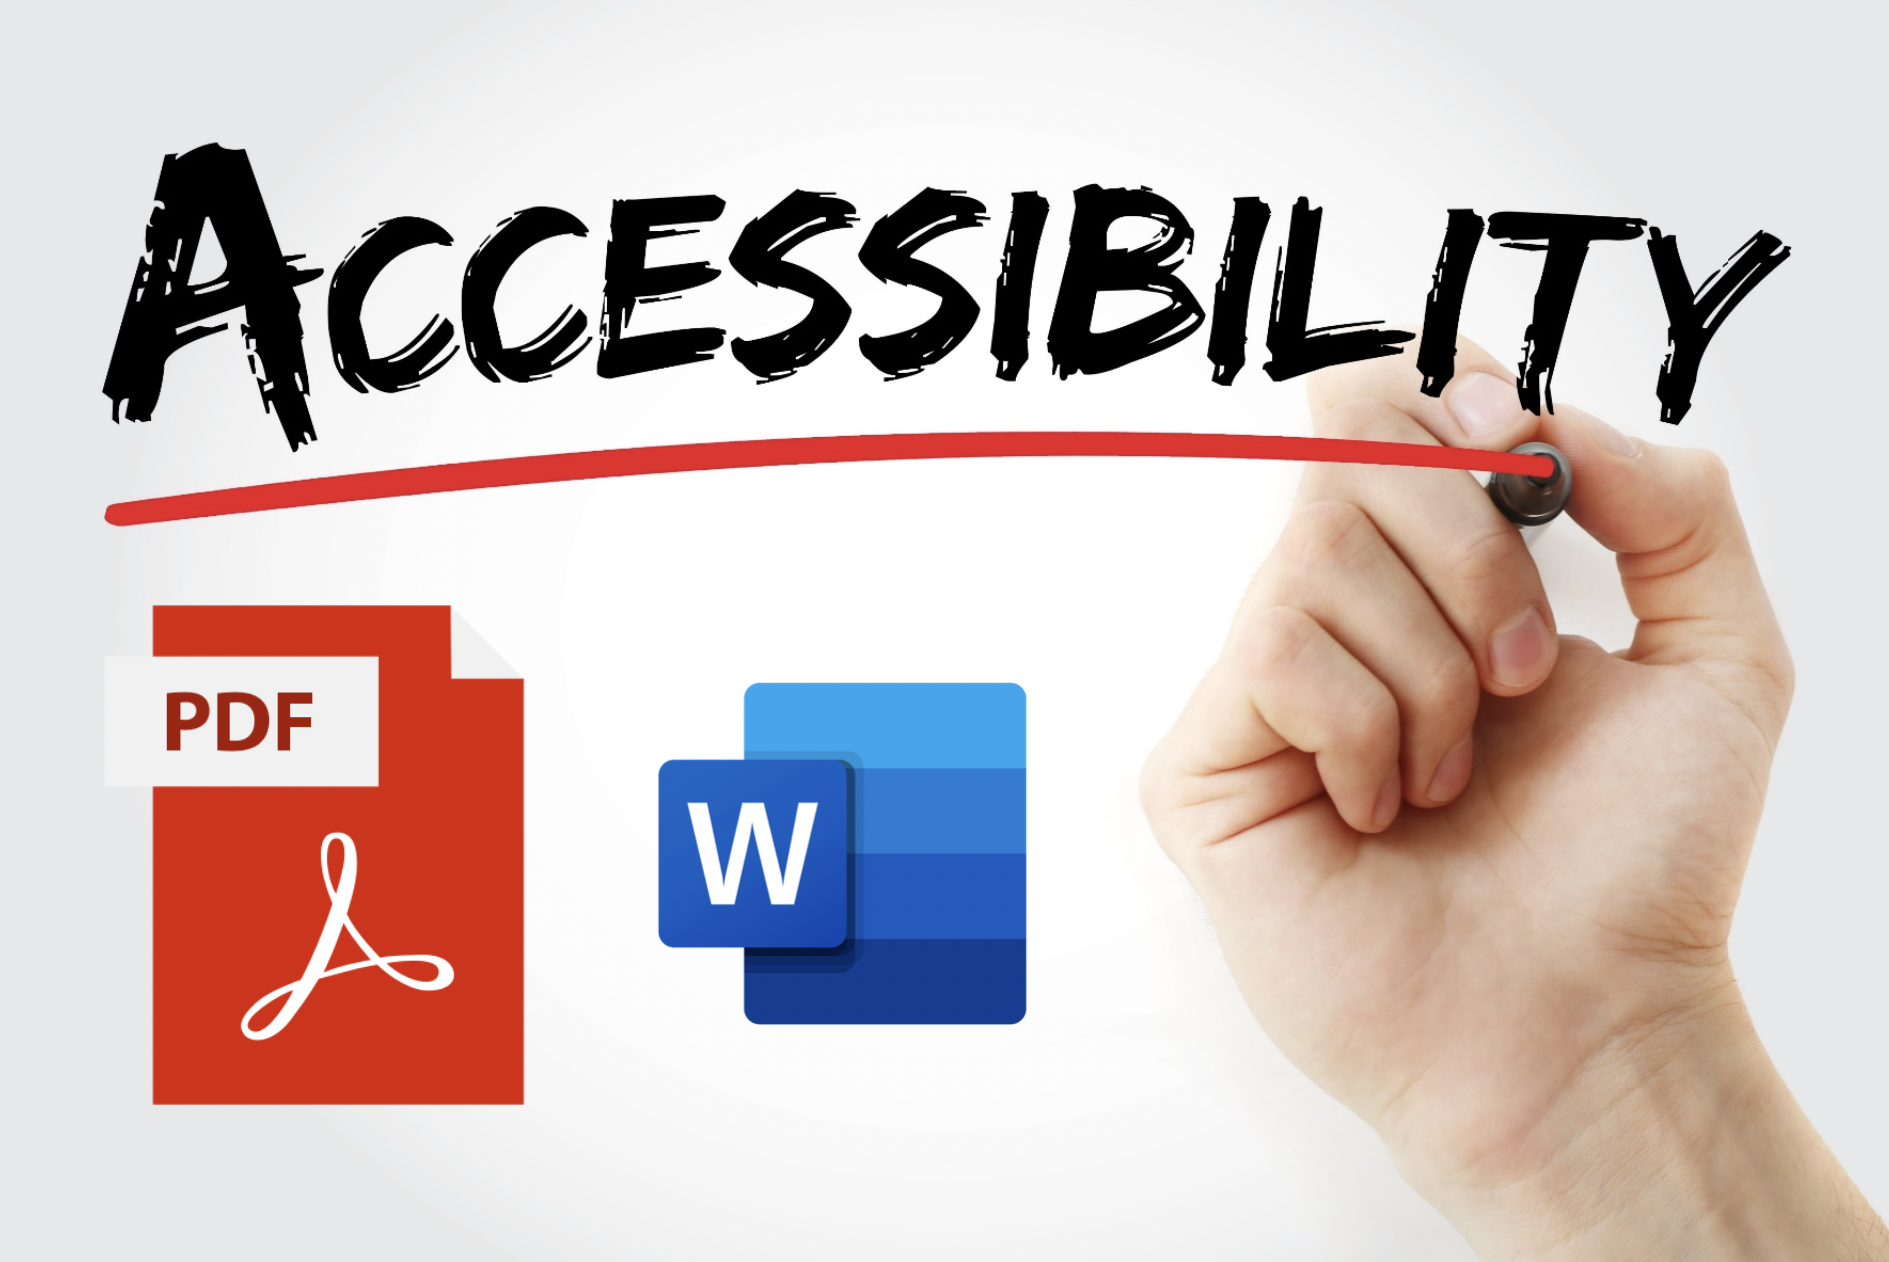 Learn how to make PDF and Word documents more accessible